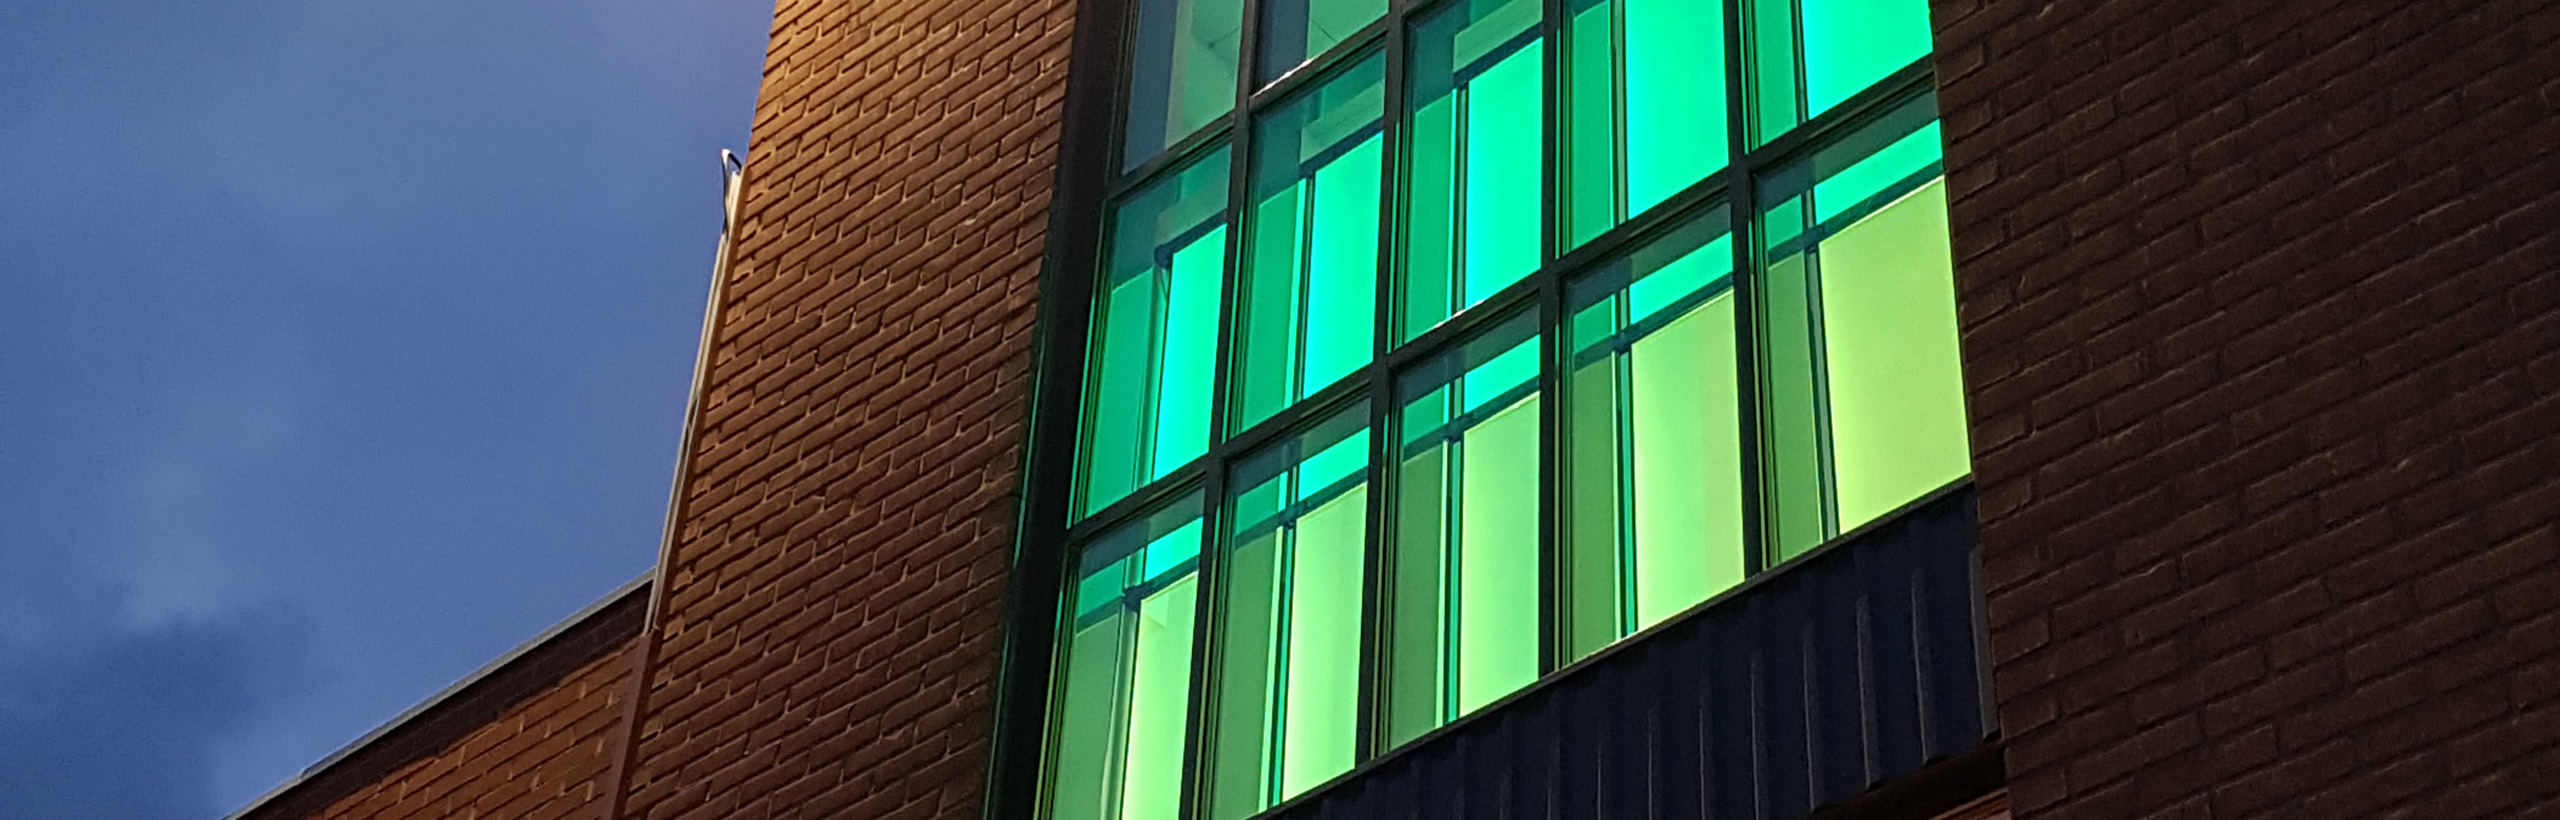 AICCI Reference project Realisation of a light artwork Thermal Colours for an office building of